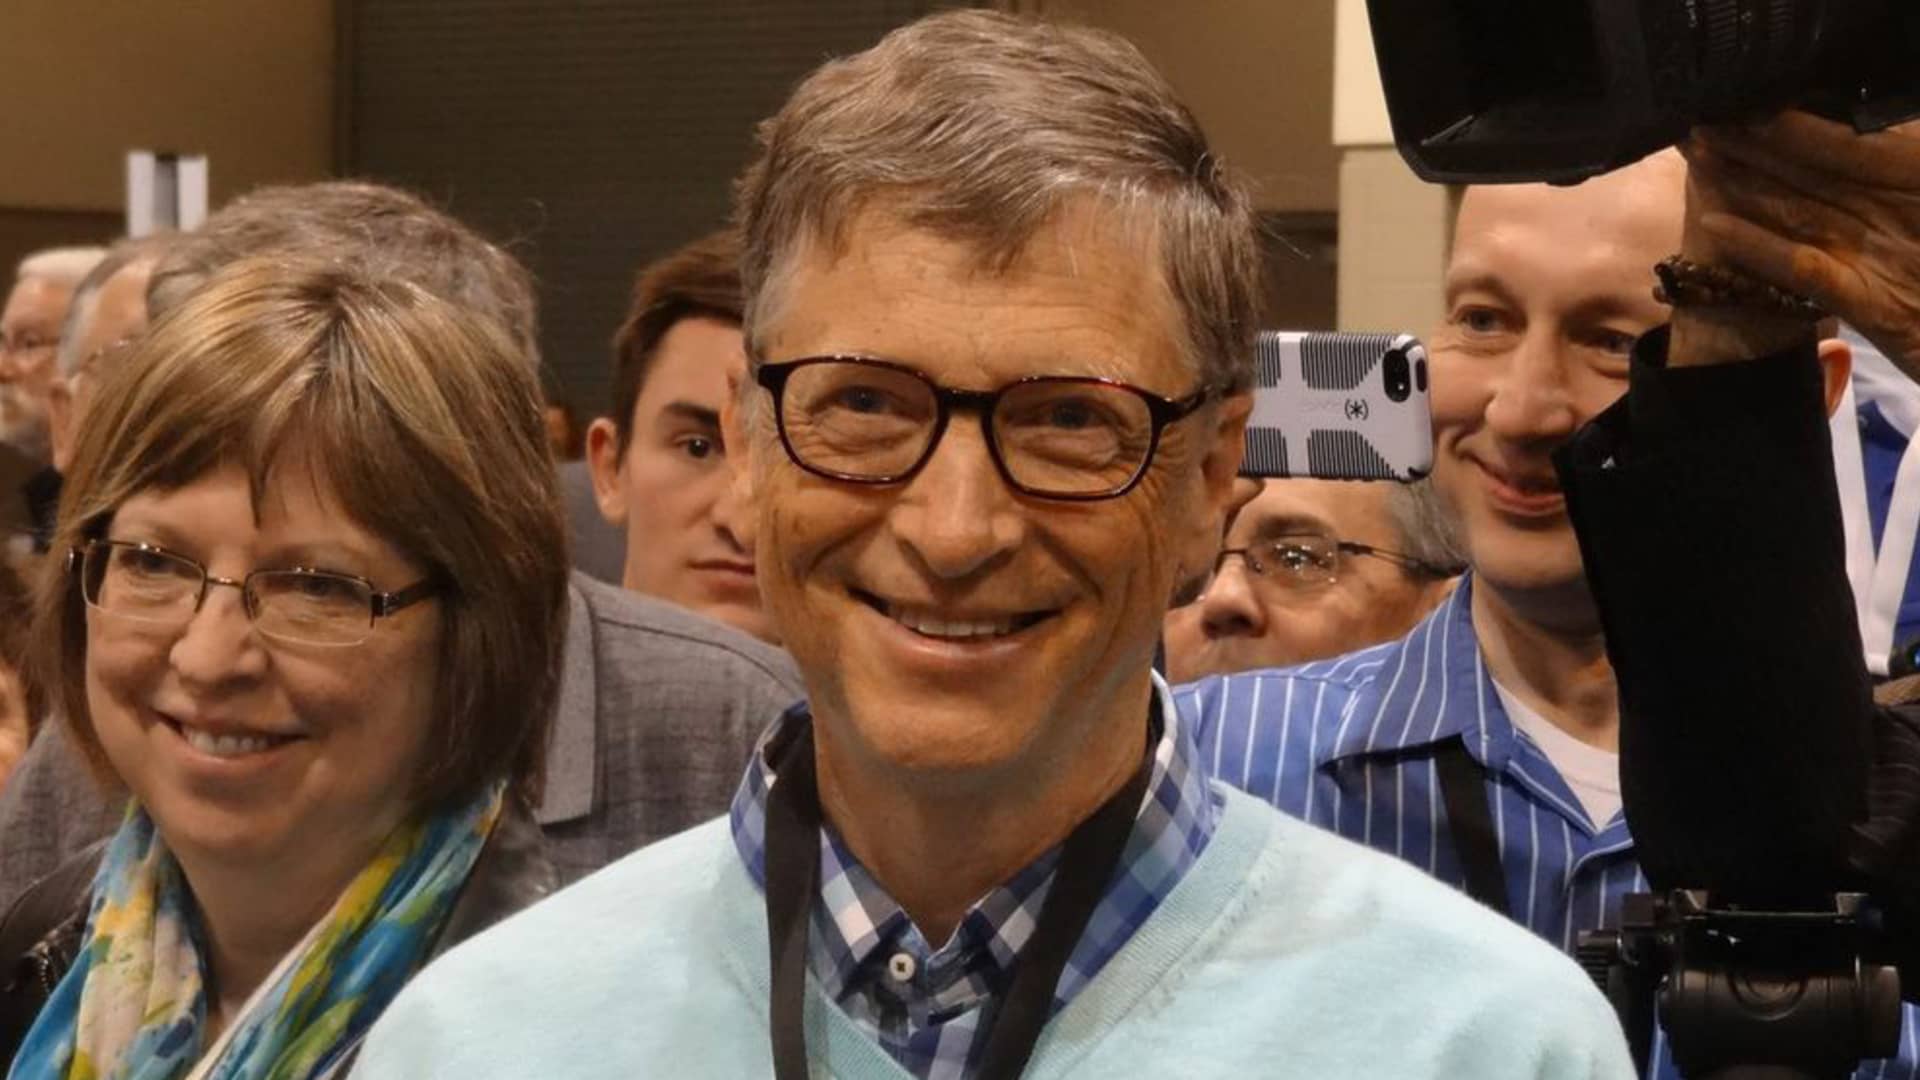 Bill Gates could become the world's first trillionaire